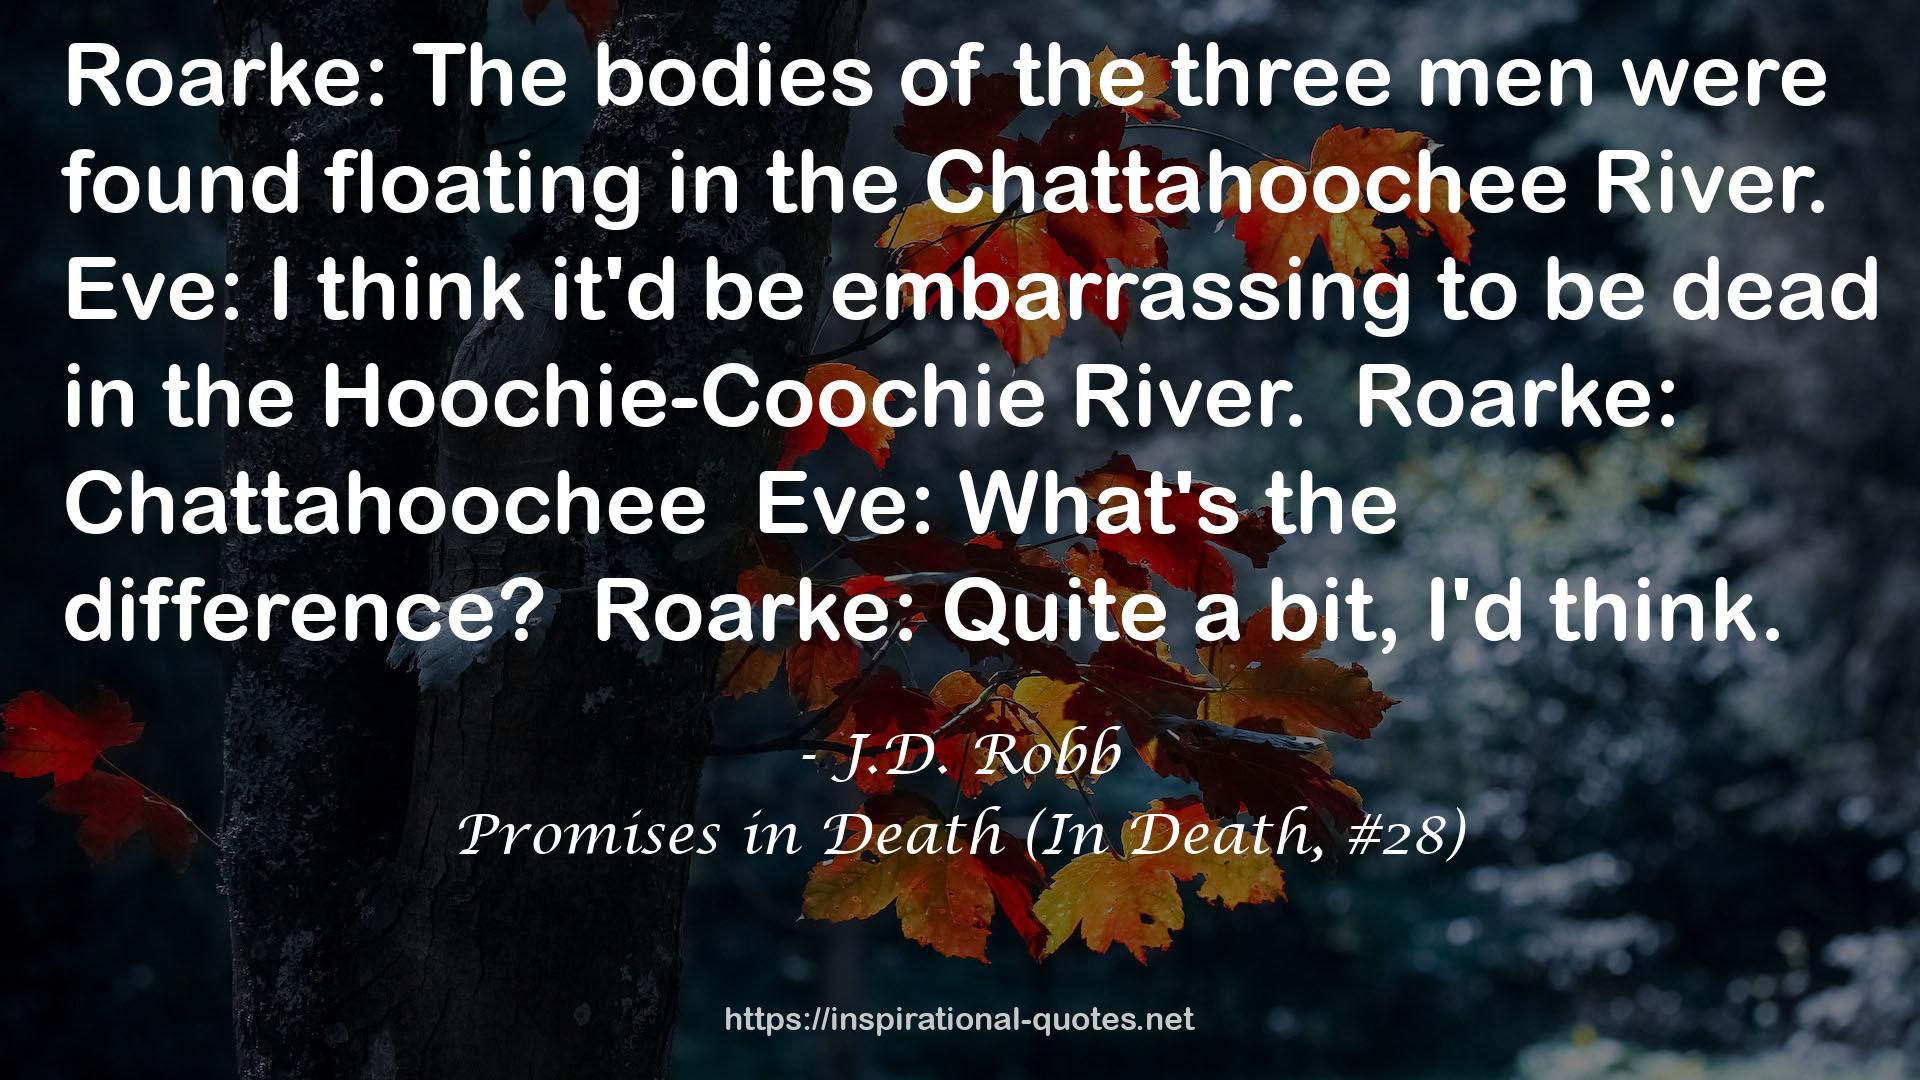 Promises in Death (In Death, #28) QUOTES